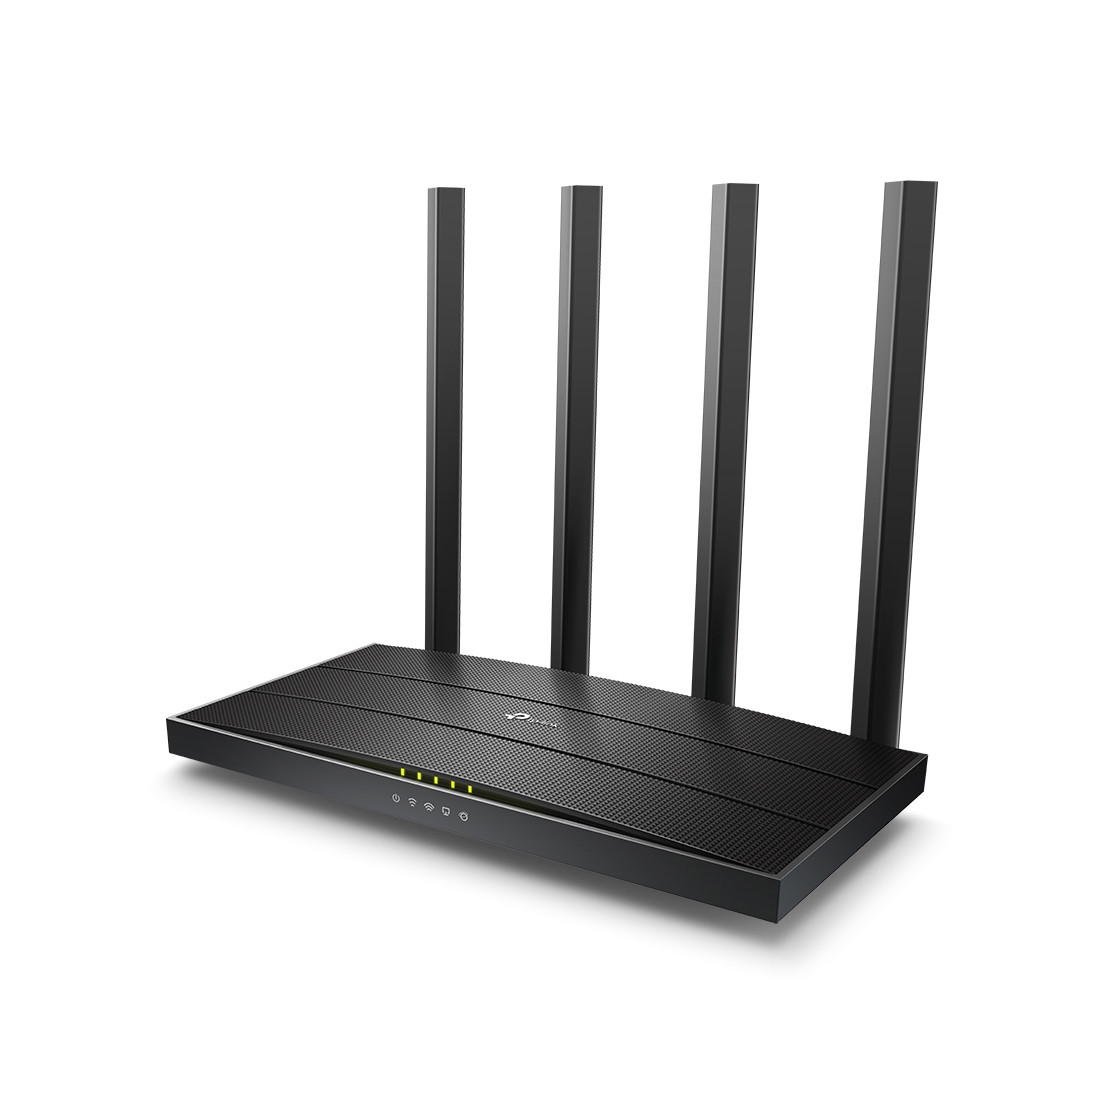 Маршрутизатор TP-Link Archer C80 2-005517